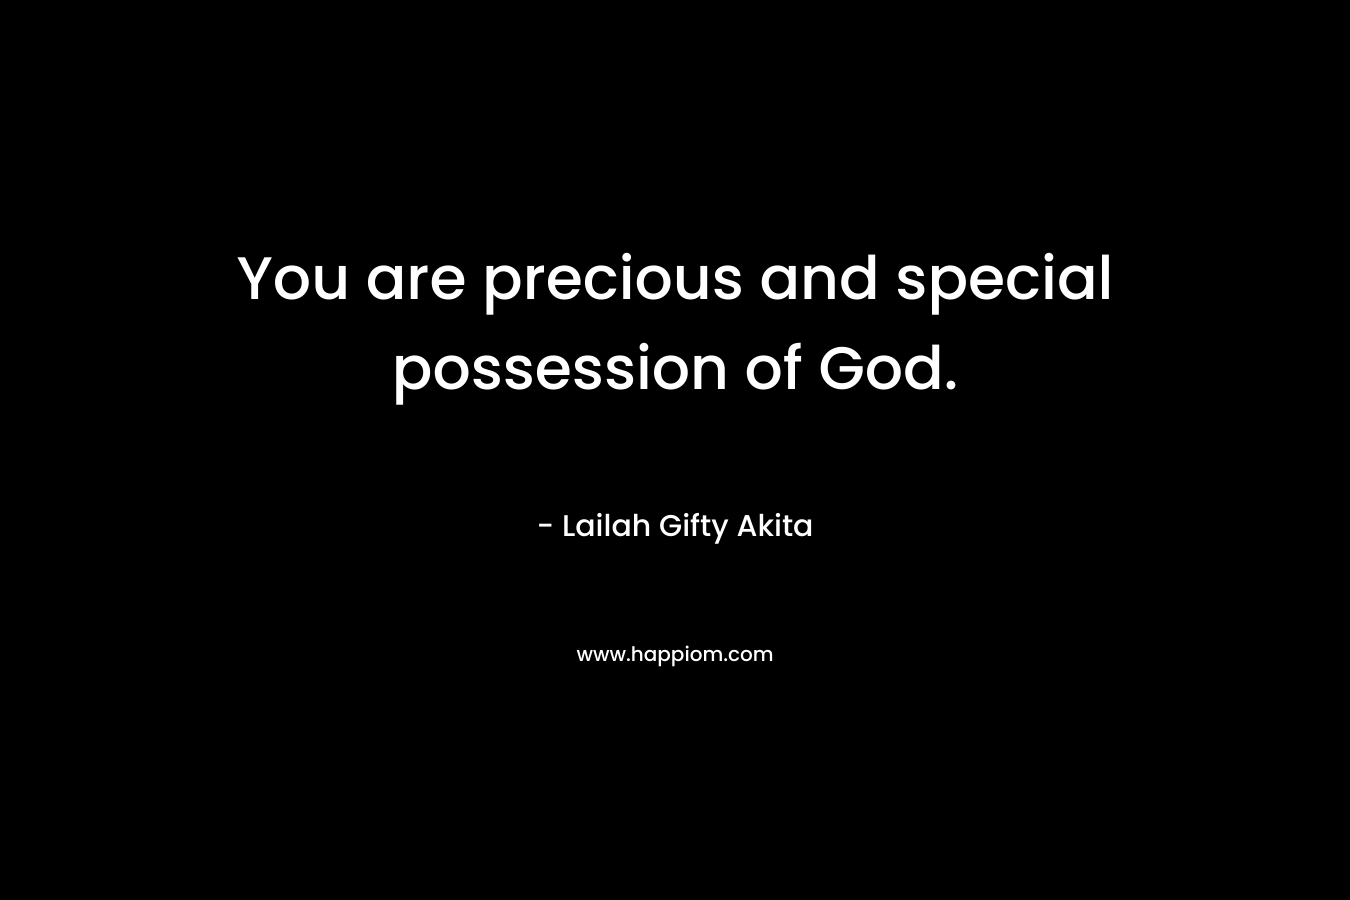 You are precious and special possession of God.